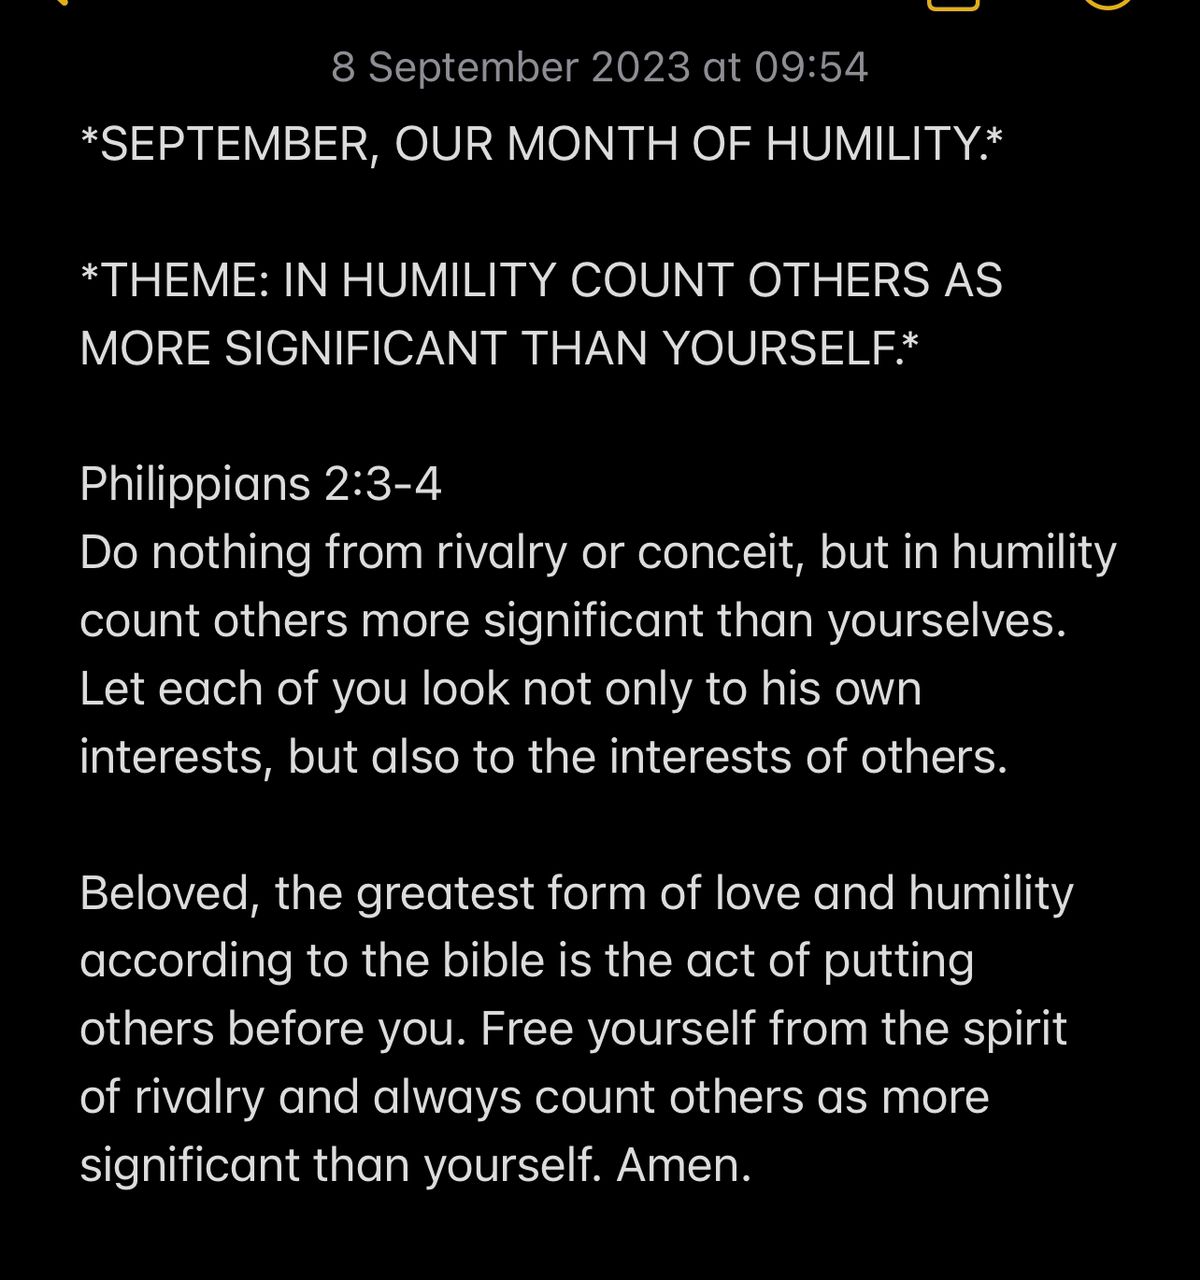 IN HUMILITY COUNT OTHERS AS MORE SIGNIFICANT THAN YOURSELF.